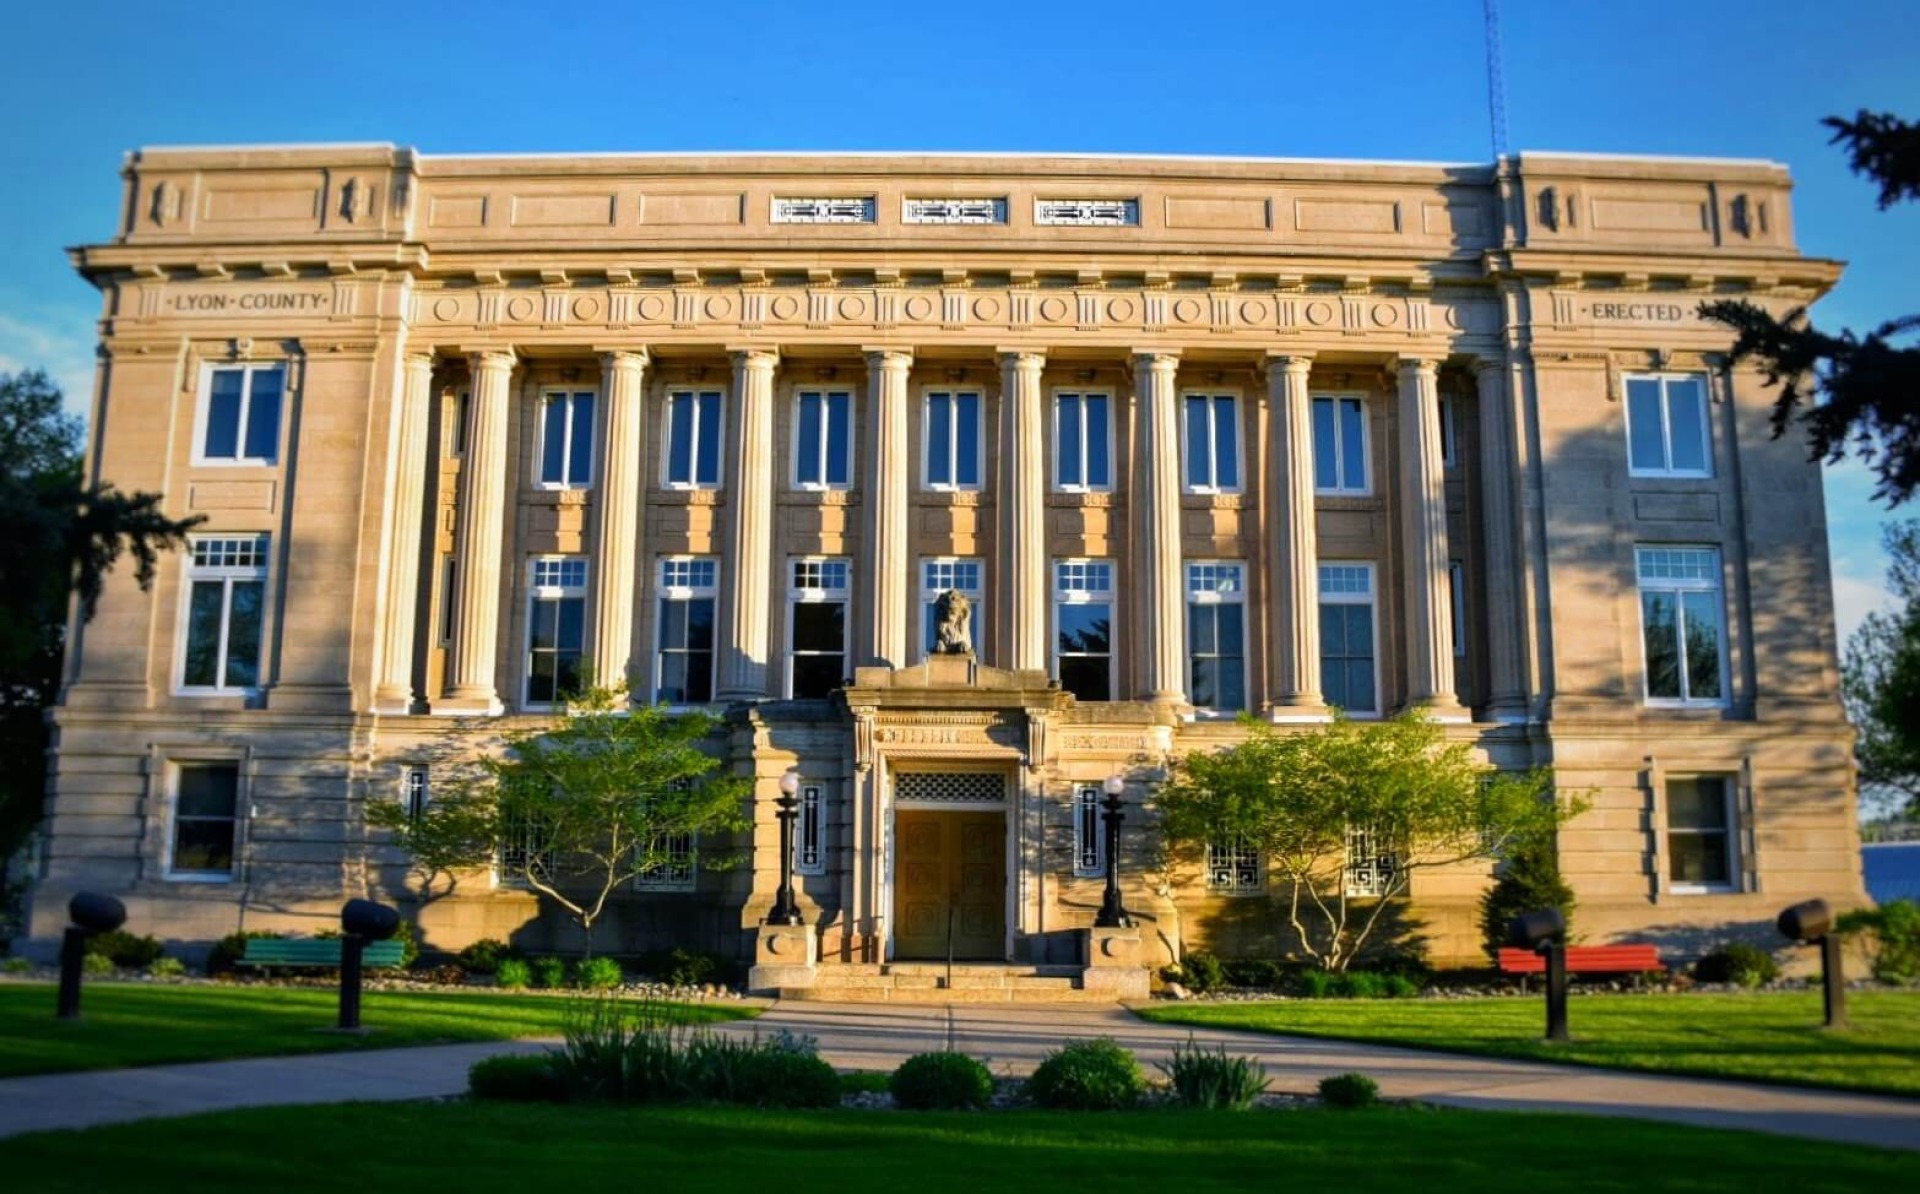 The Lyon County Courthouse photographed in spring.